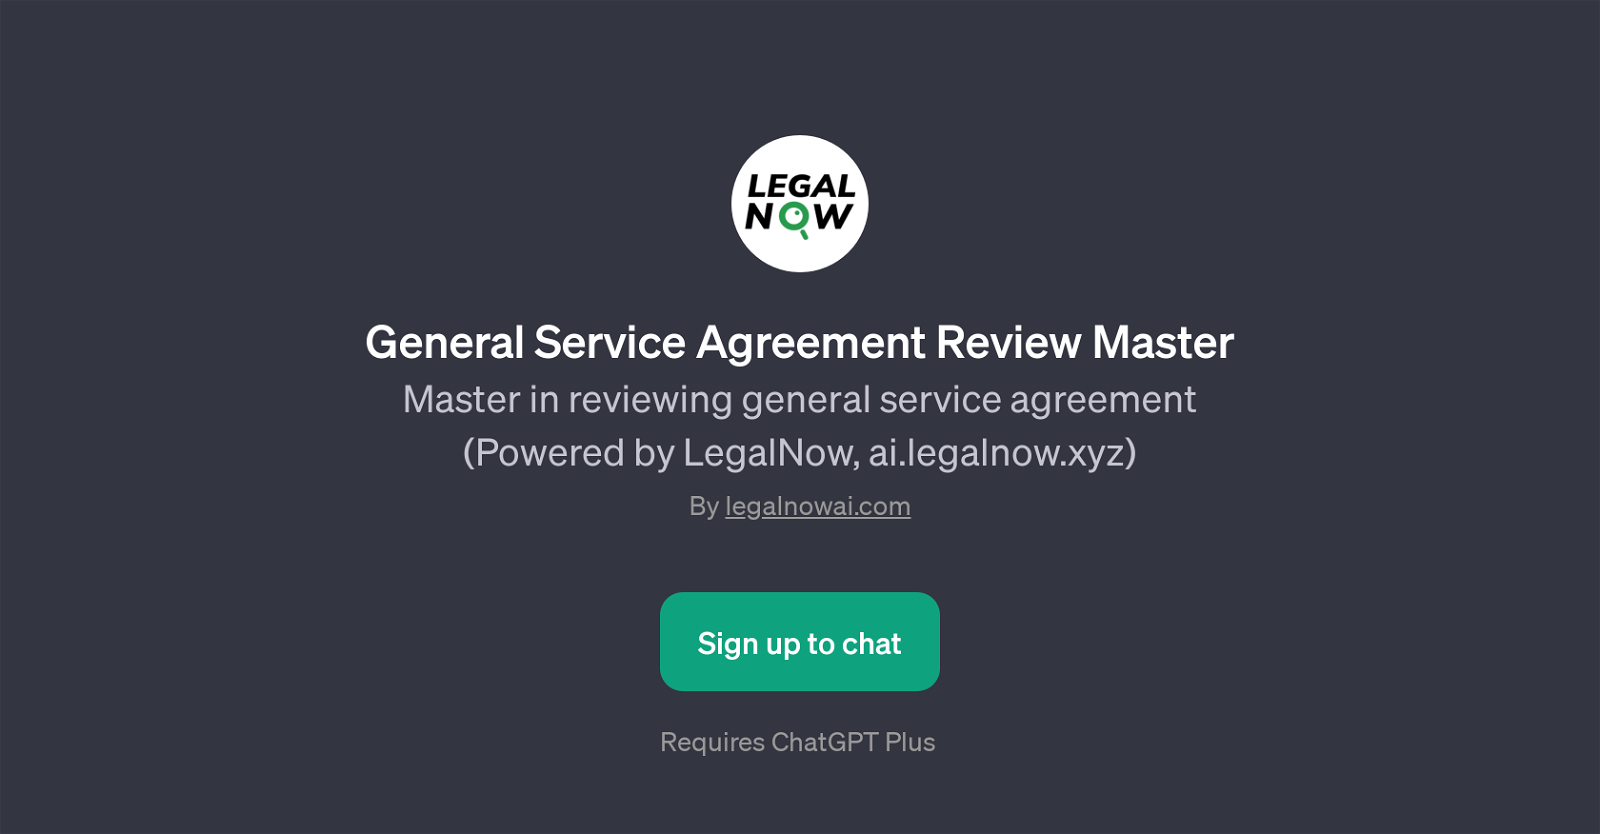 General Service Agreement Review Master website